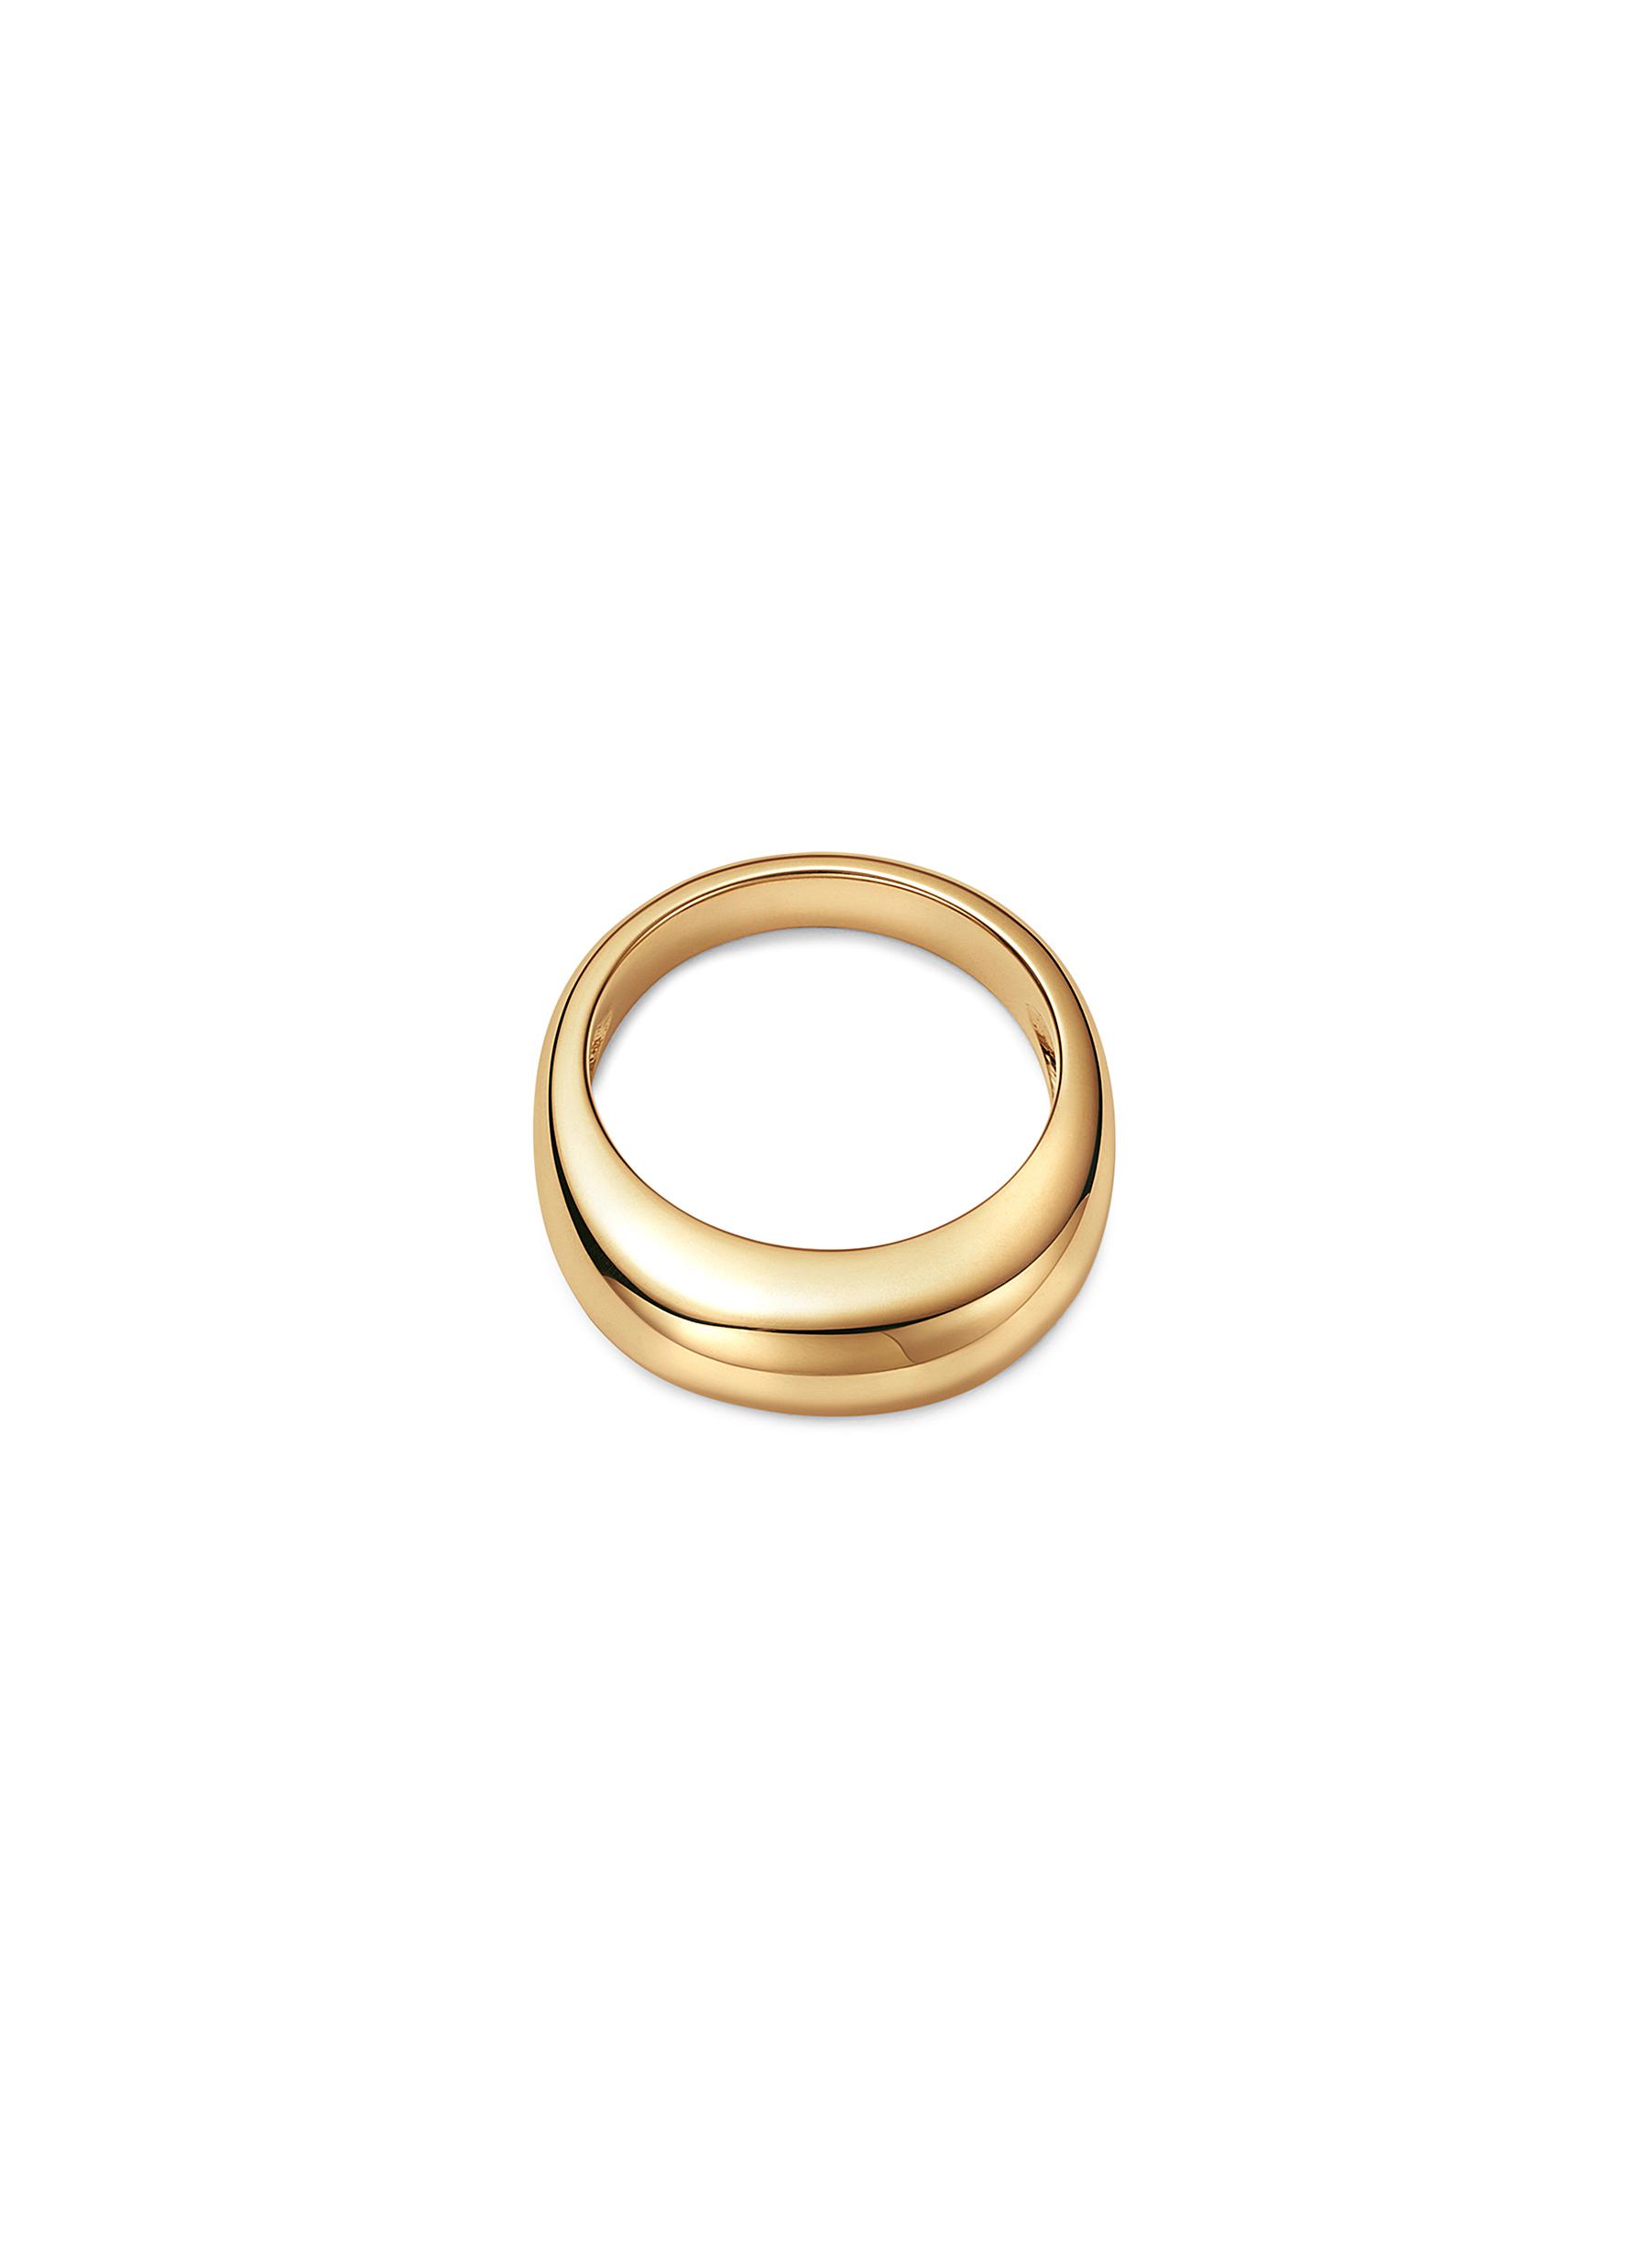 FUTURA 18k fairmined ecological gold vaulted ring